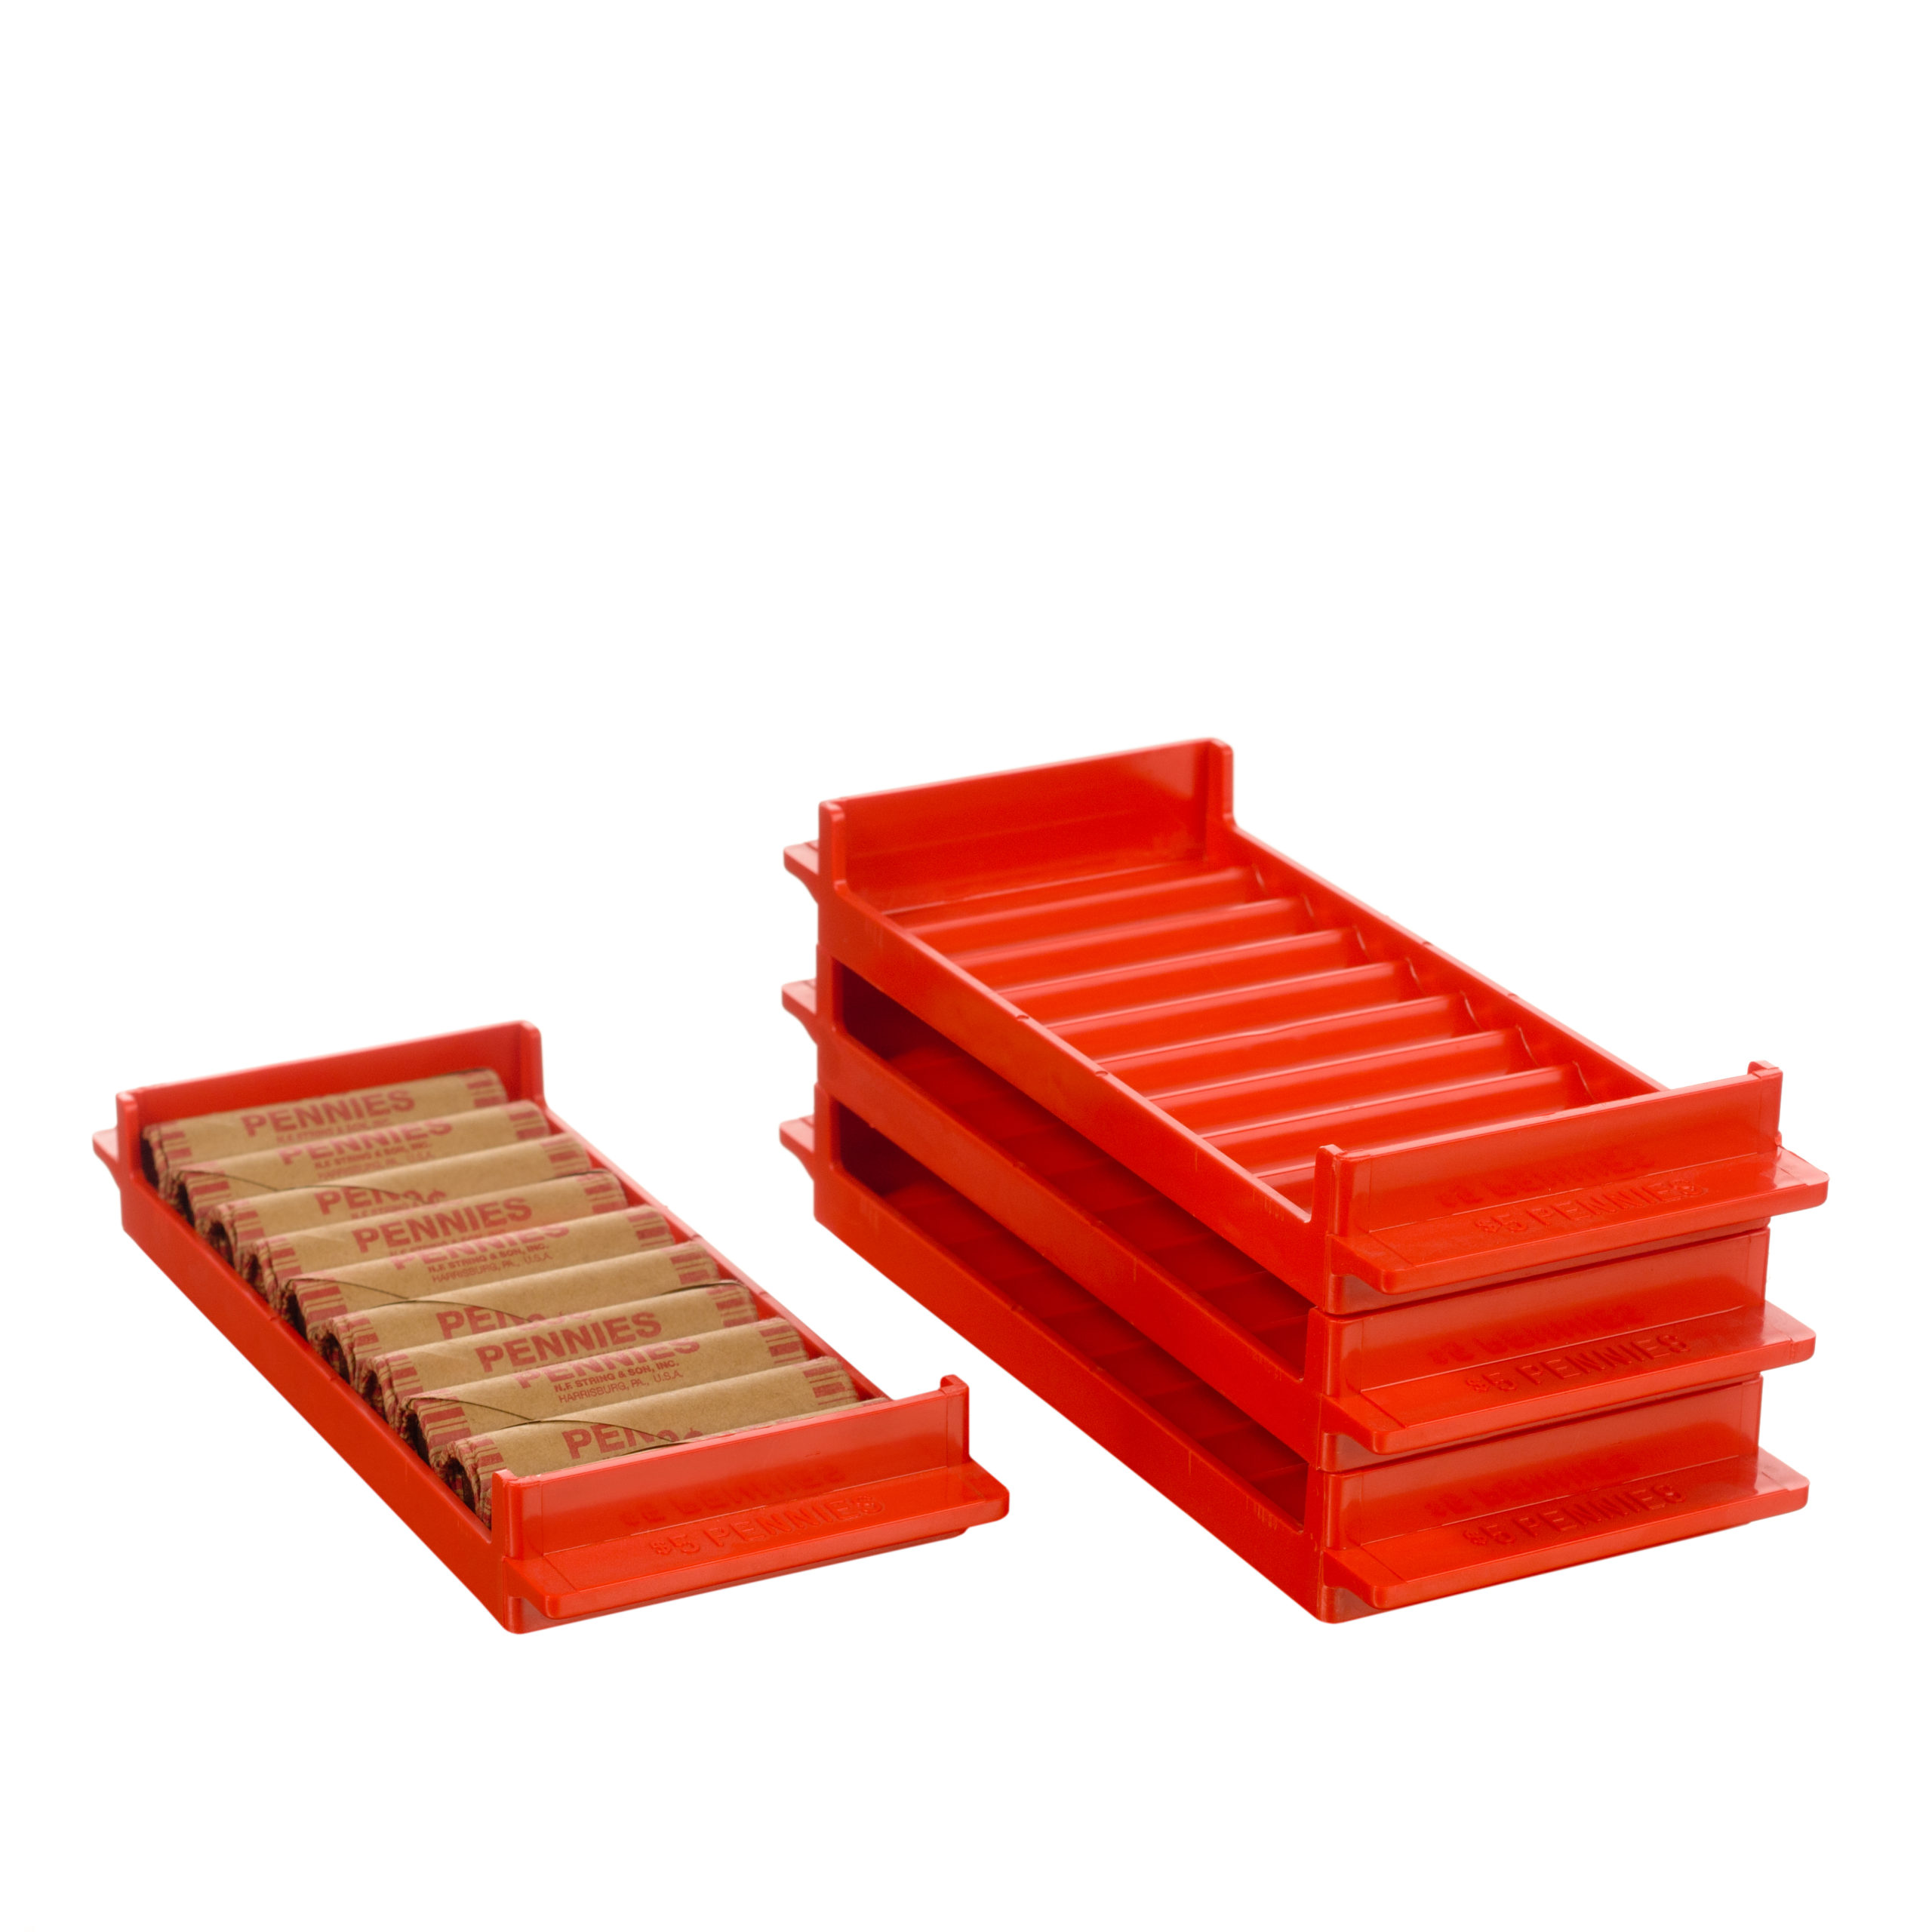 Rolled coin tray, penny N018355